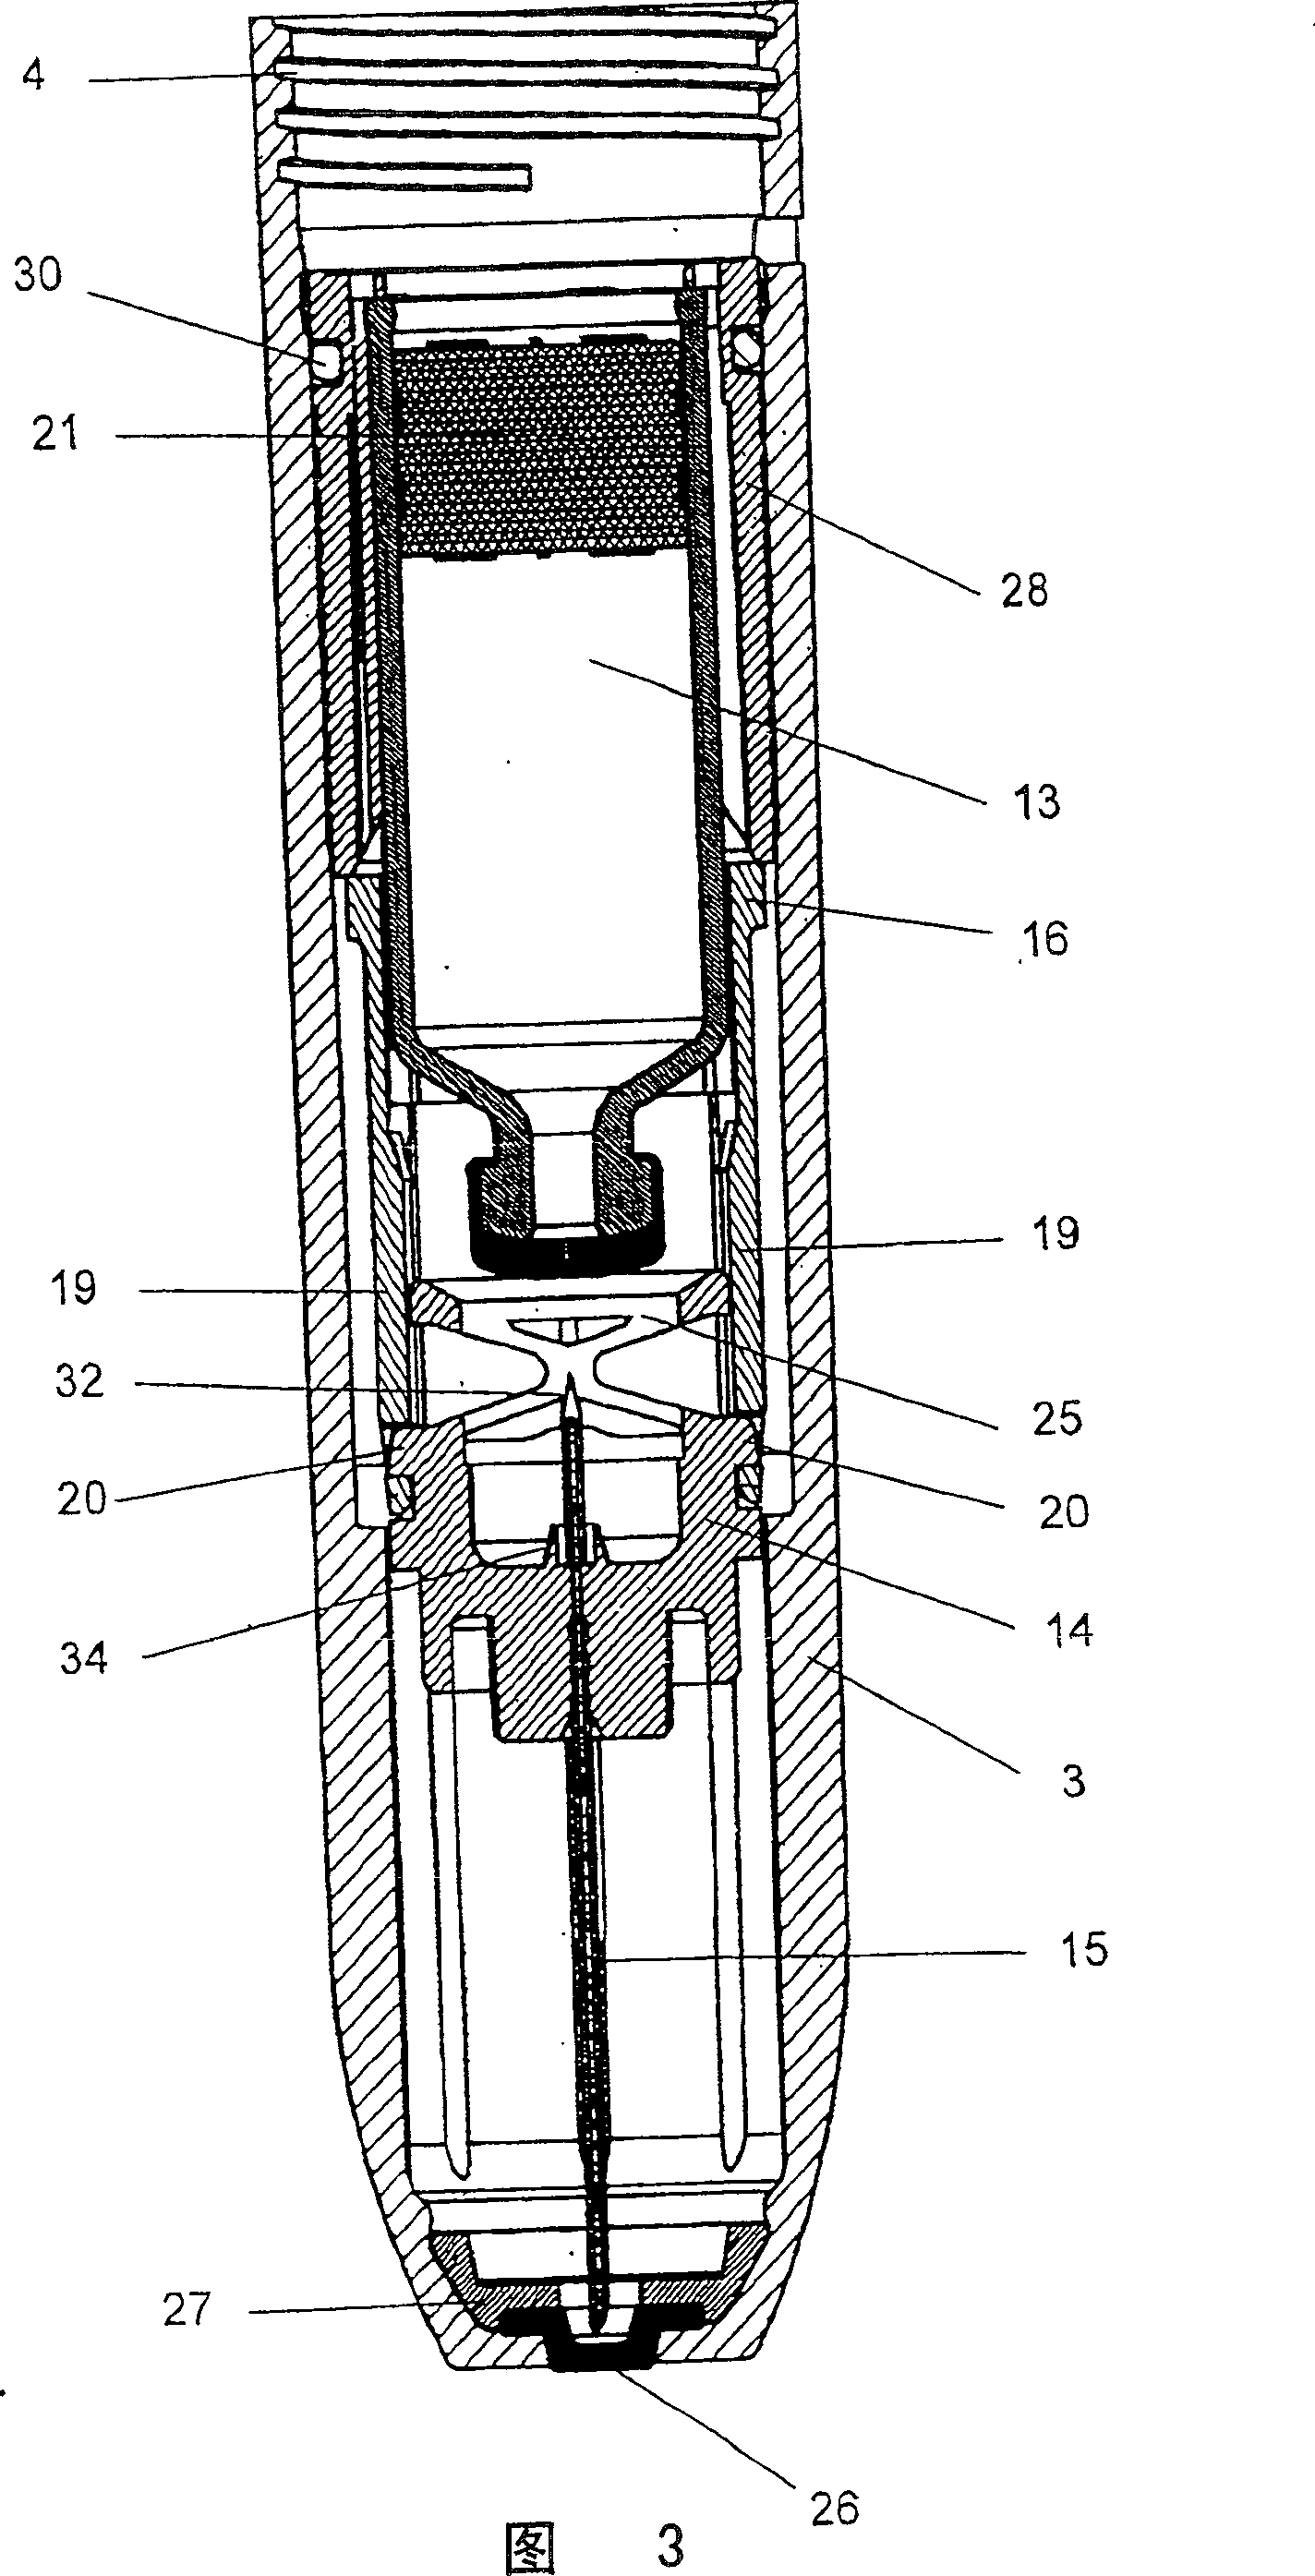 Device for automatically injecting liquid